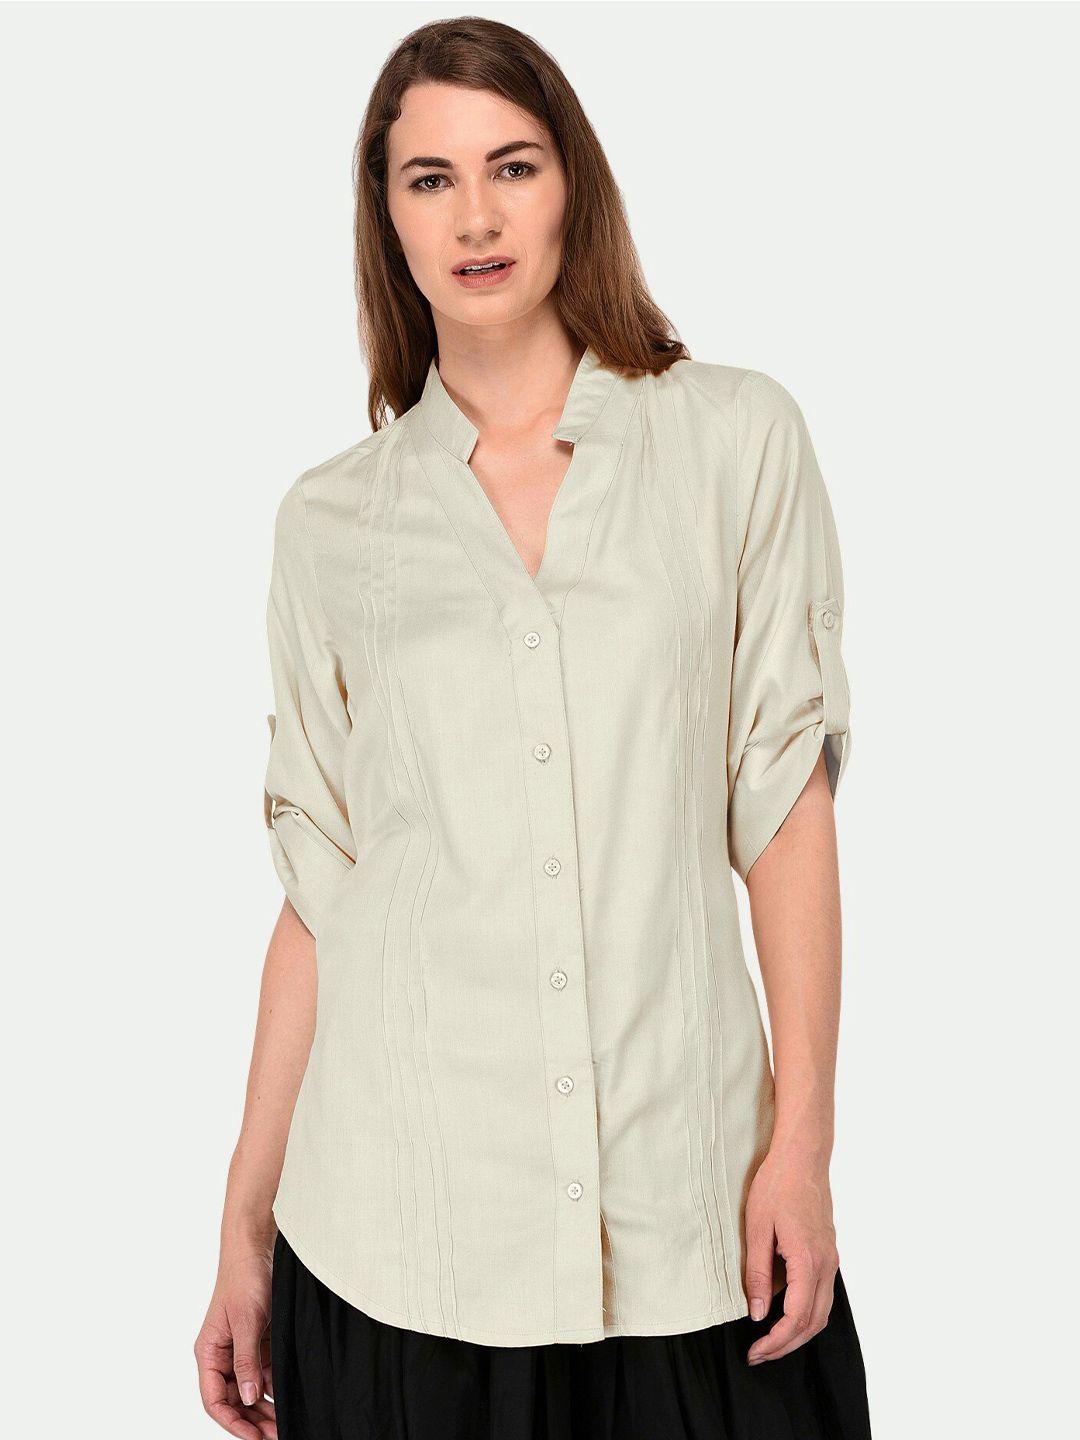 patrorna-women-off-white-comfort-solid-casual-shirt